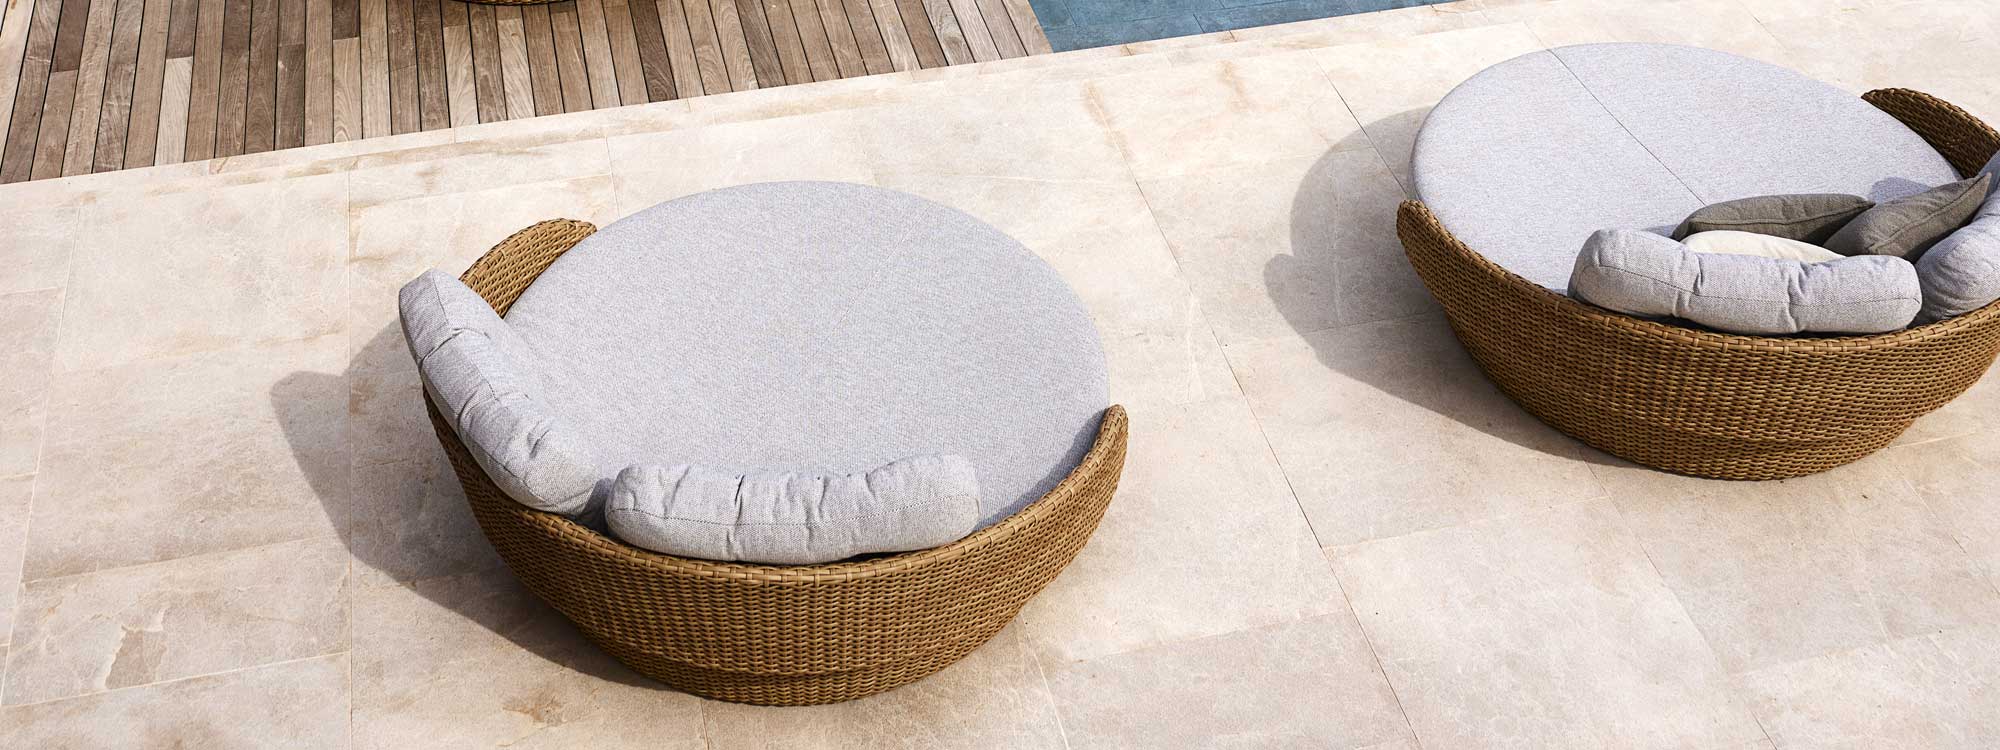 Image of pair of Cane-line Ocean Large round garden daybeds in natural Cane-line Flat Weave with White-Brown Cane-line Link fabric cushions